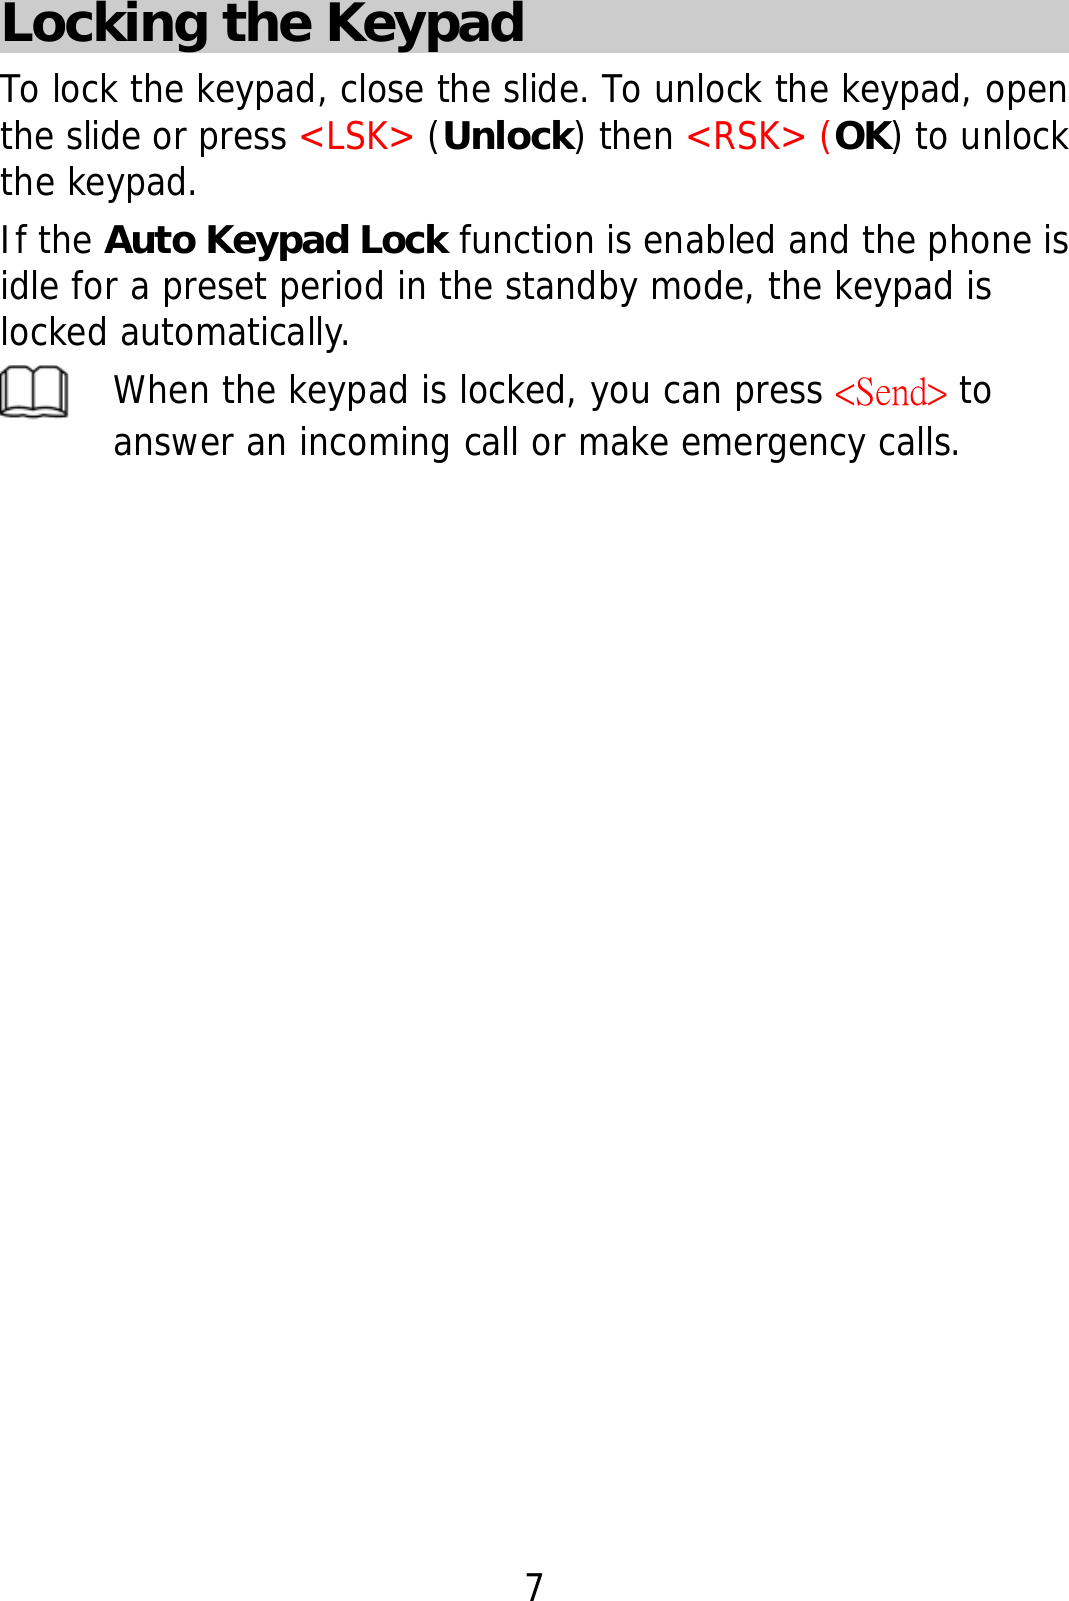 7 Locking the Keypad To lock the keypad, close the slide. To unlock the keypad, open the slide or press &lt;LSK&gt; (Unlock) then &lt;RSK&gt; (OK) to unlock the keypad. If the Auto Keypad Lock function is enabled and the phone is idle for a preset period in the standby mode, the keypad is locked automatically.  When the keypad is locked, you can press &lt;Send&gt; to answer an incoming call or make emergency calls.   